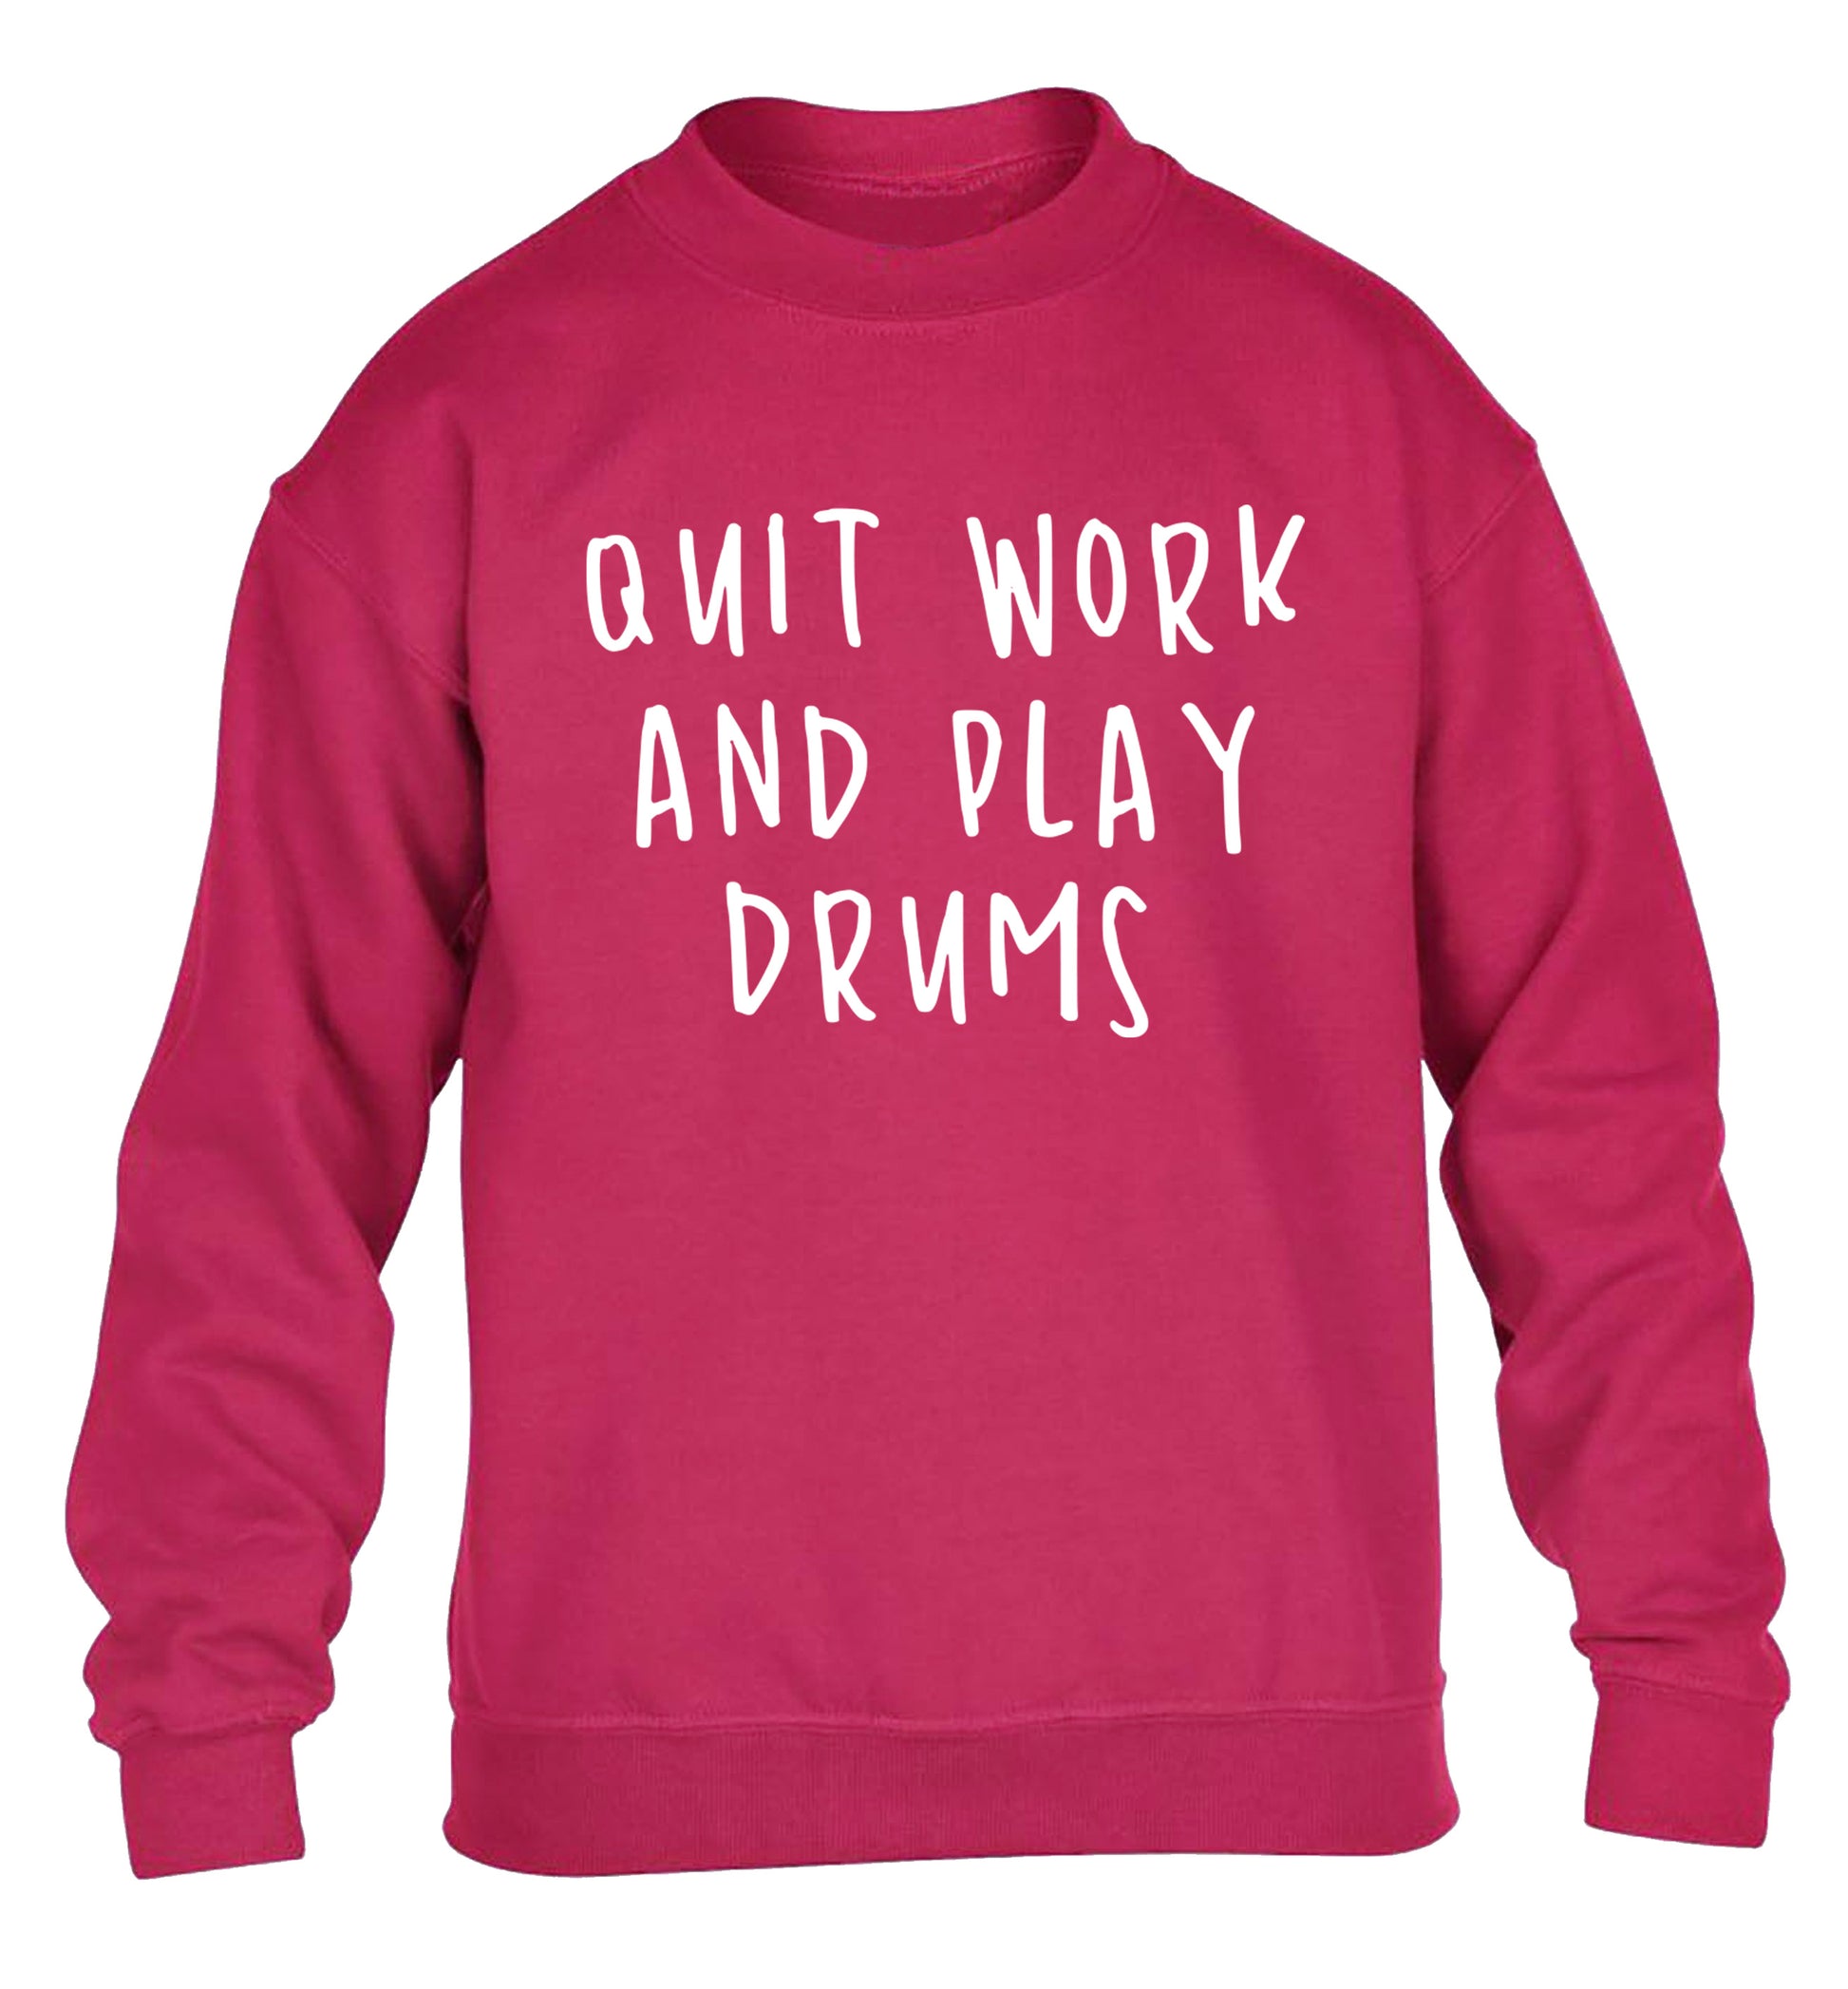 Quit work and play drums children's pink sweater 12-14 Years